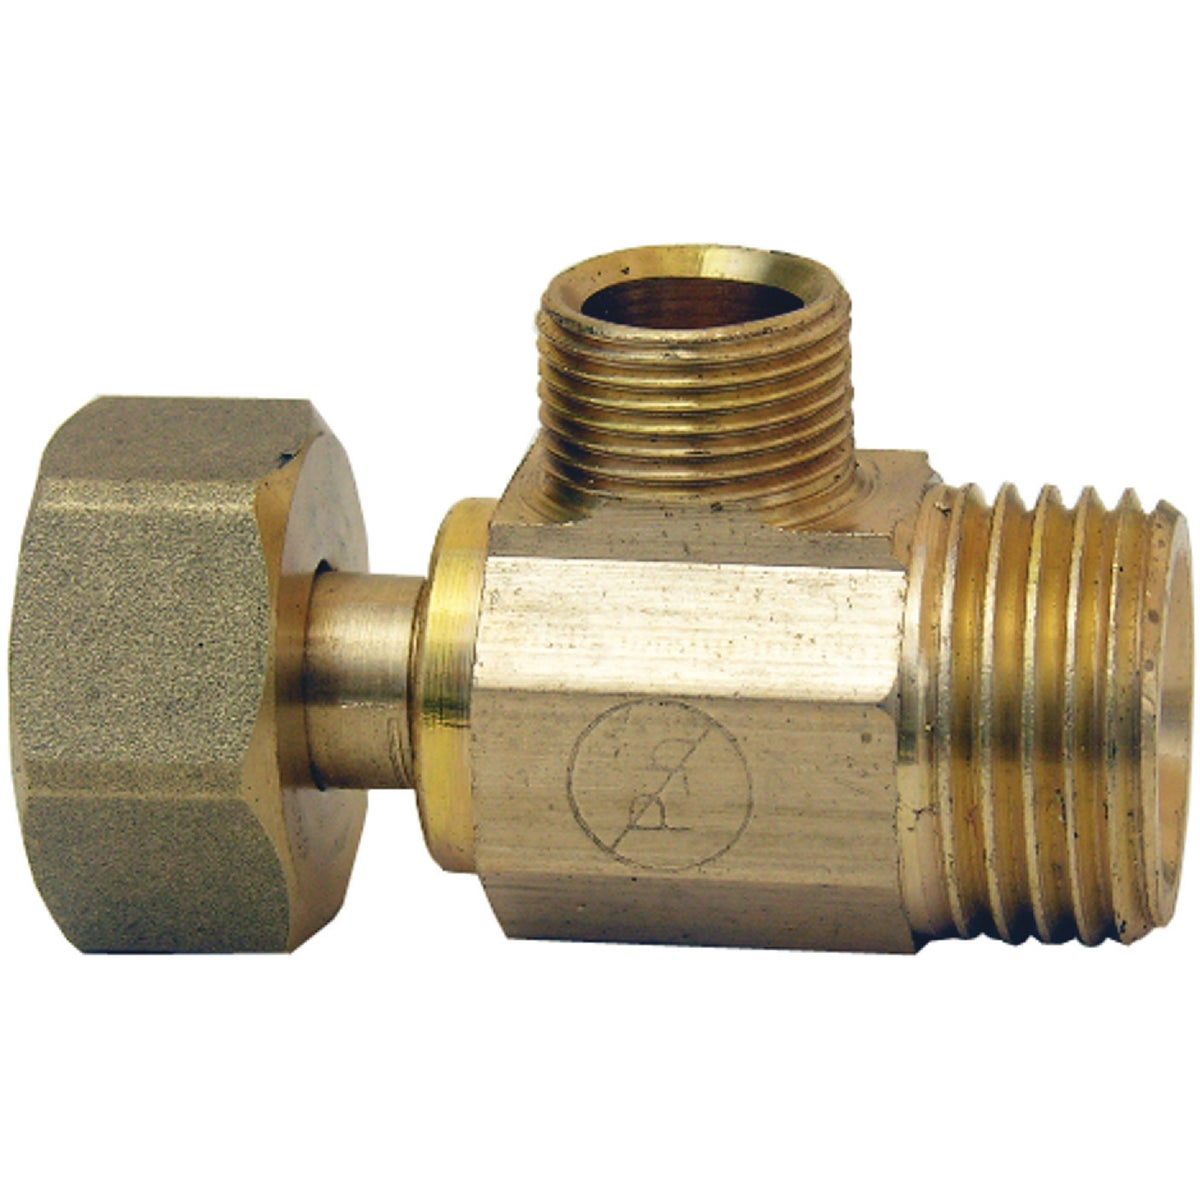 Lasco 1/2 In. IP Inlet x 1/2 In. IP Outlet x 3/8 In. C Outlet Brass Extender Tee